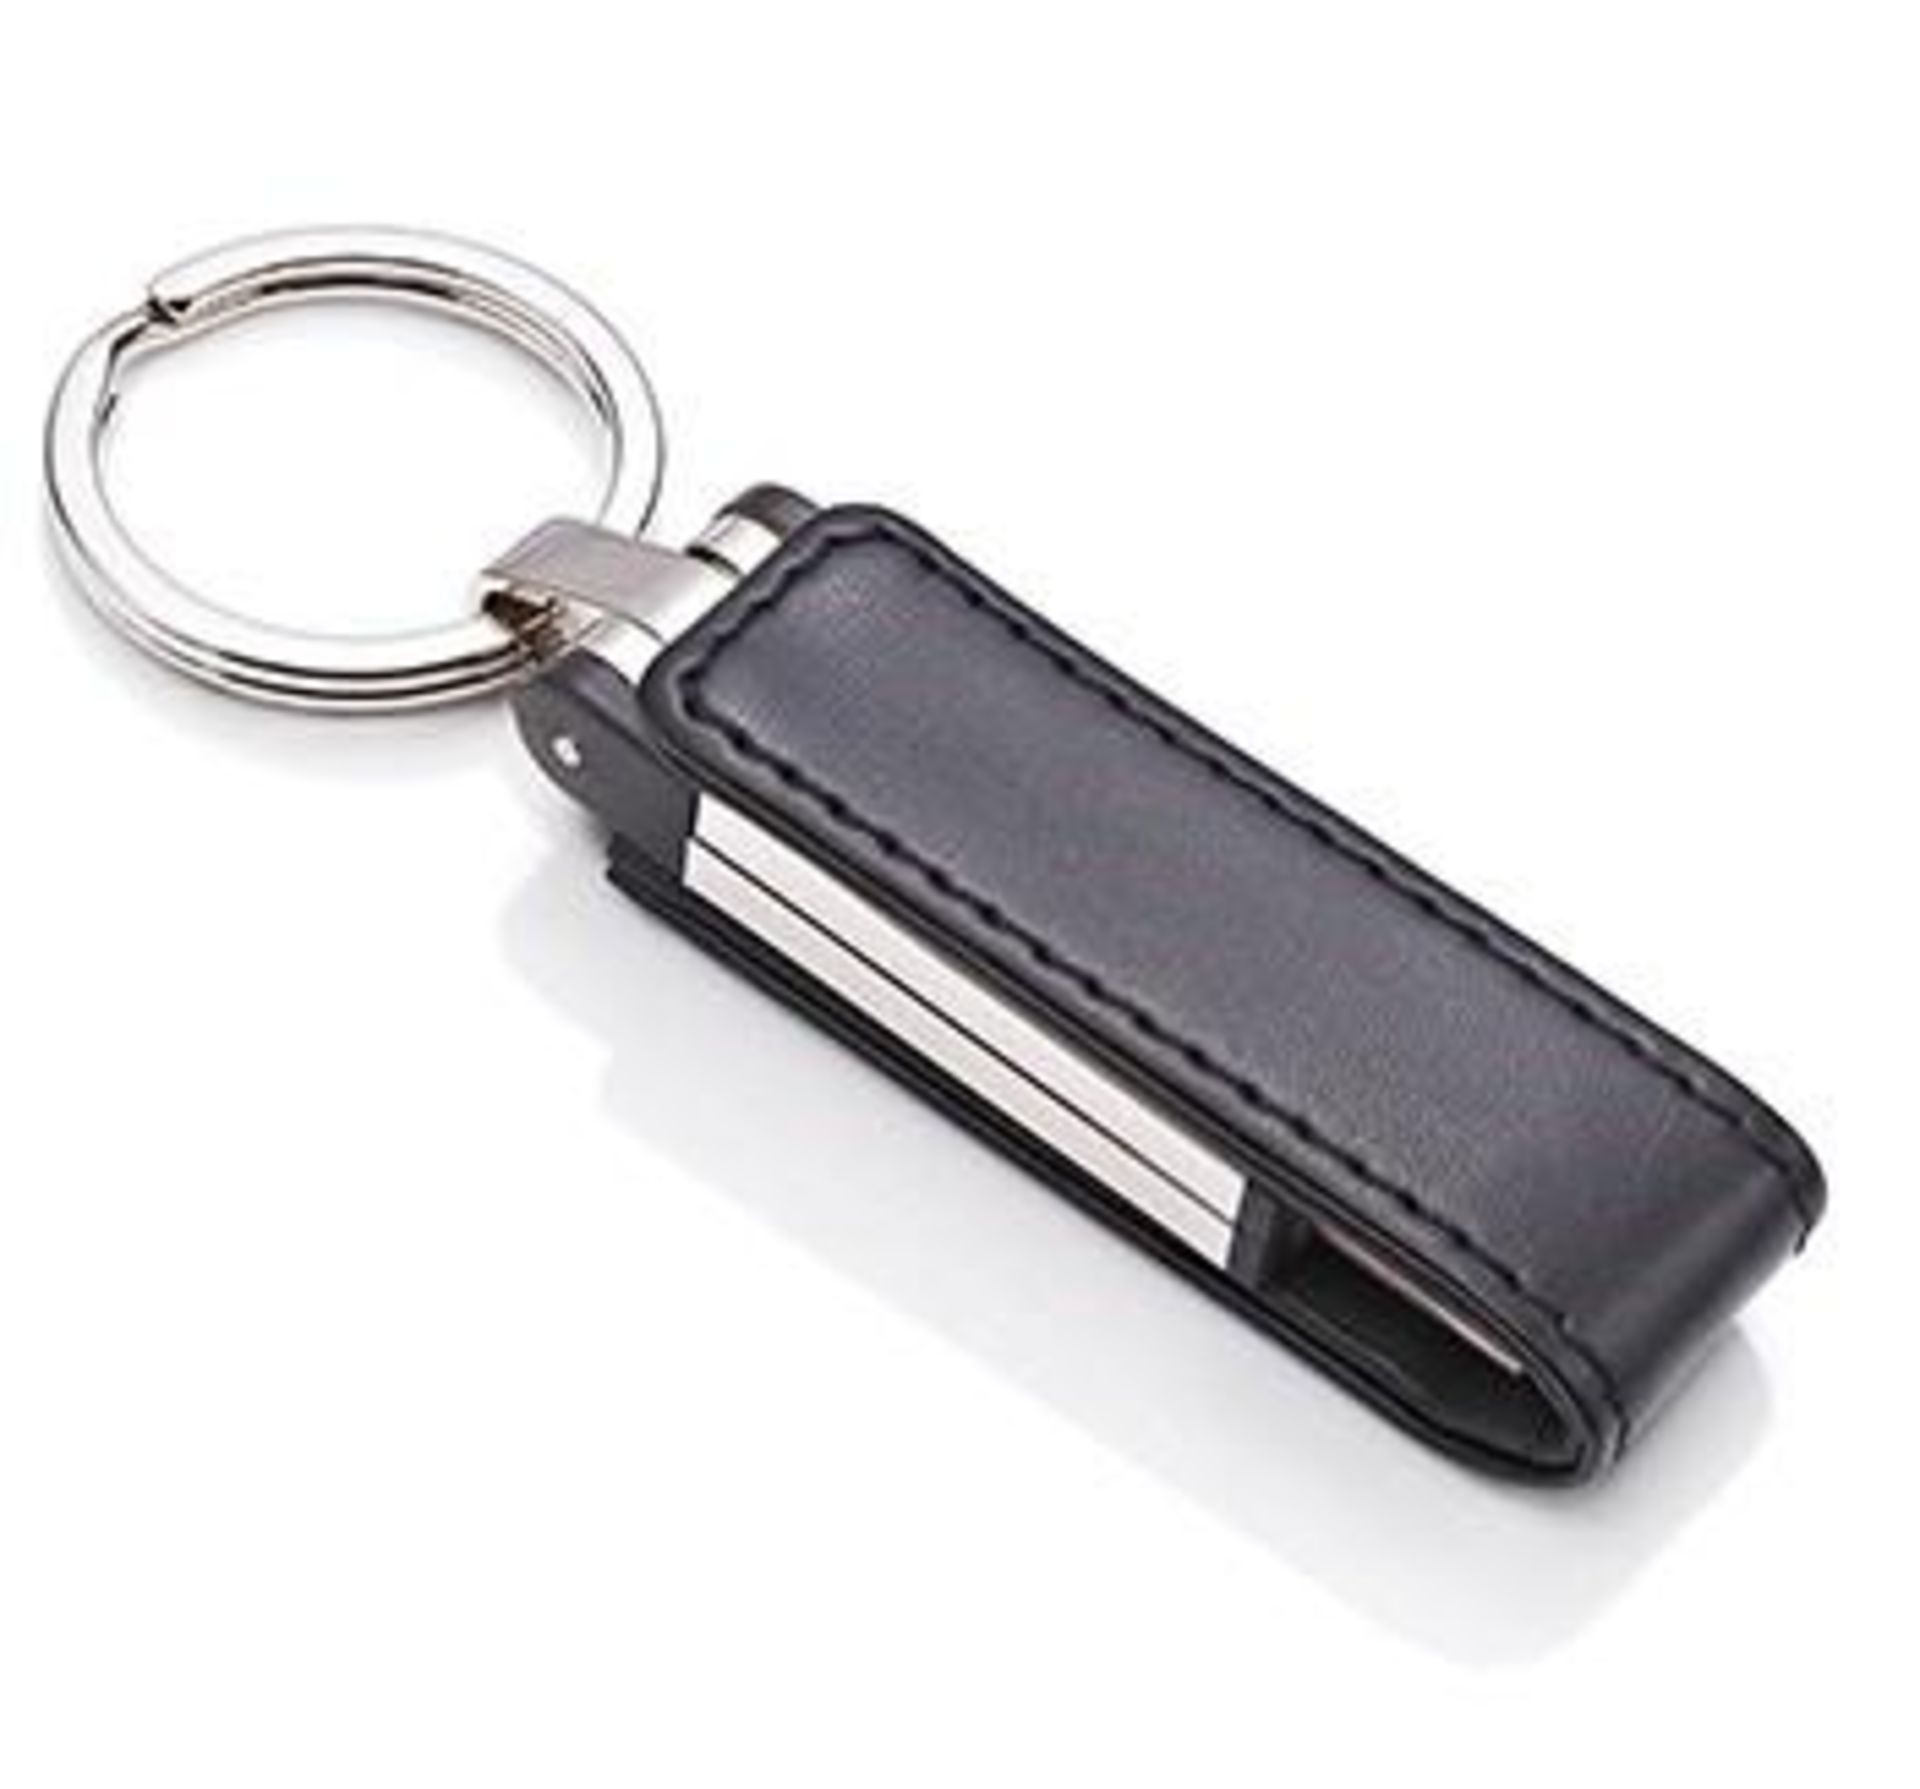 1 x ICE London Silver Plated 2GB USB Flashdrive Keyring - Features A Genuine Leather Wrap With - Image 3 of 6